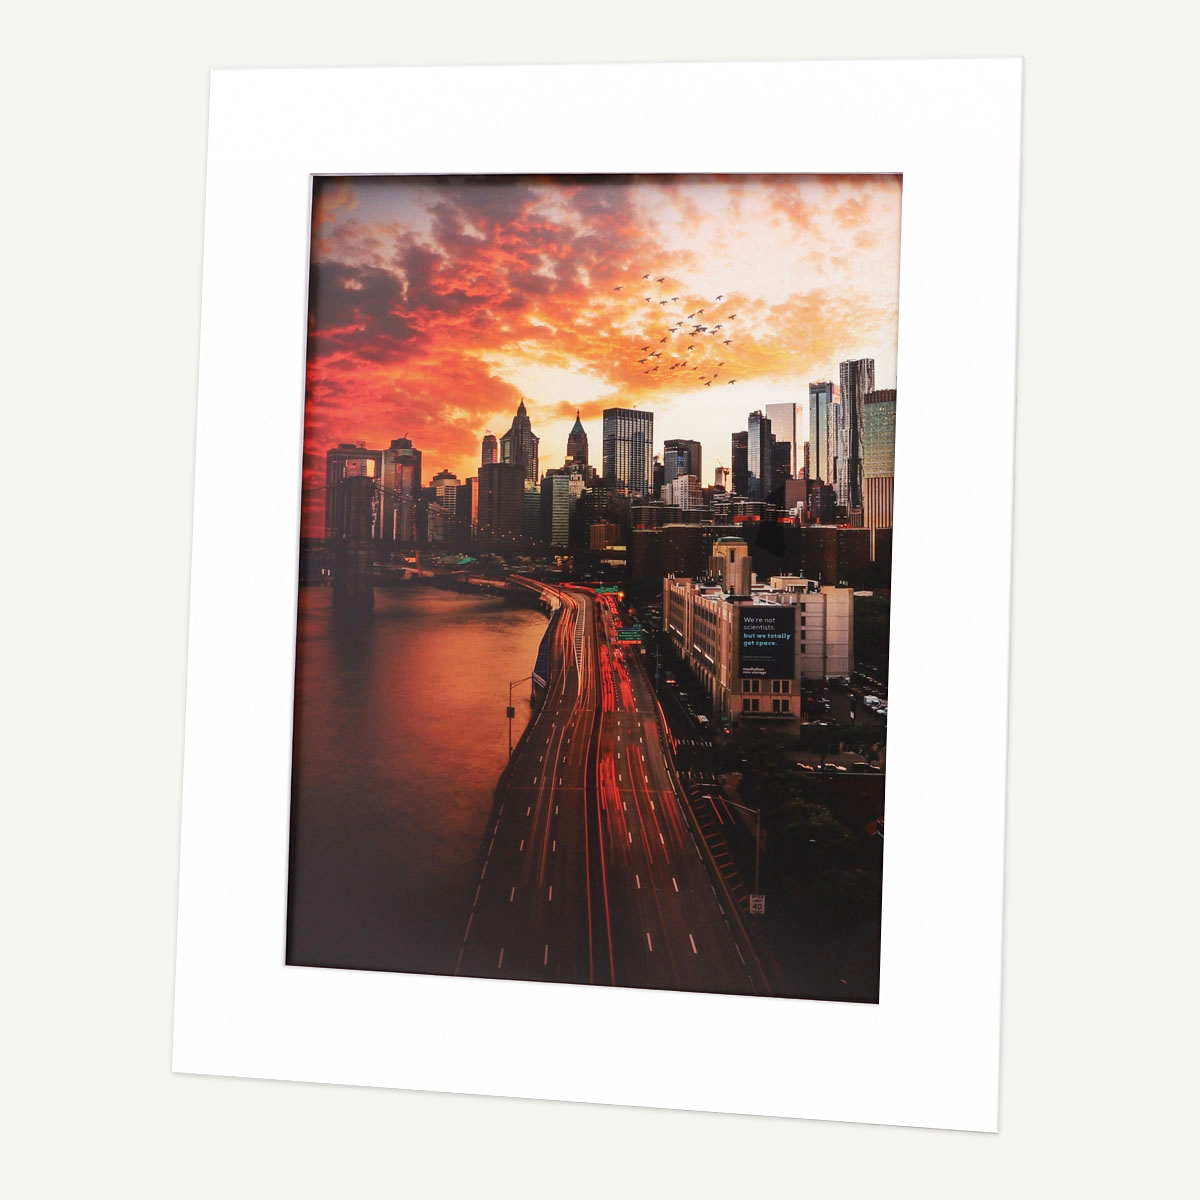 Golden State Art,16x20 Pre-cut Double Mat with Whitecore fits 11x14 Picture